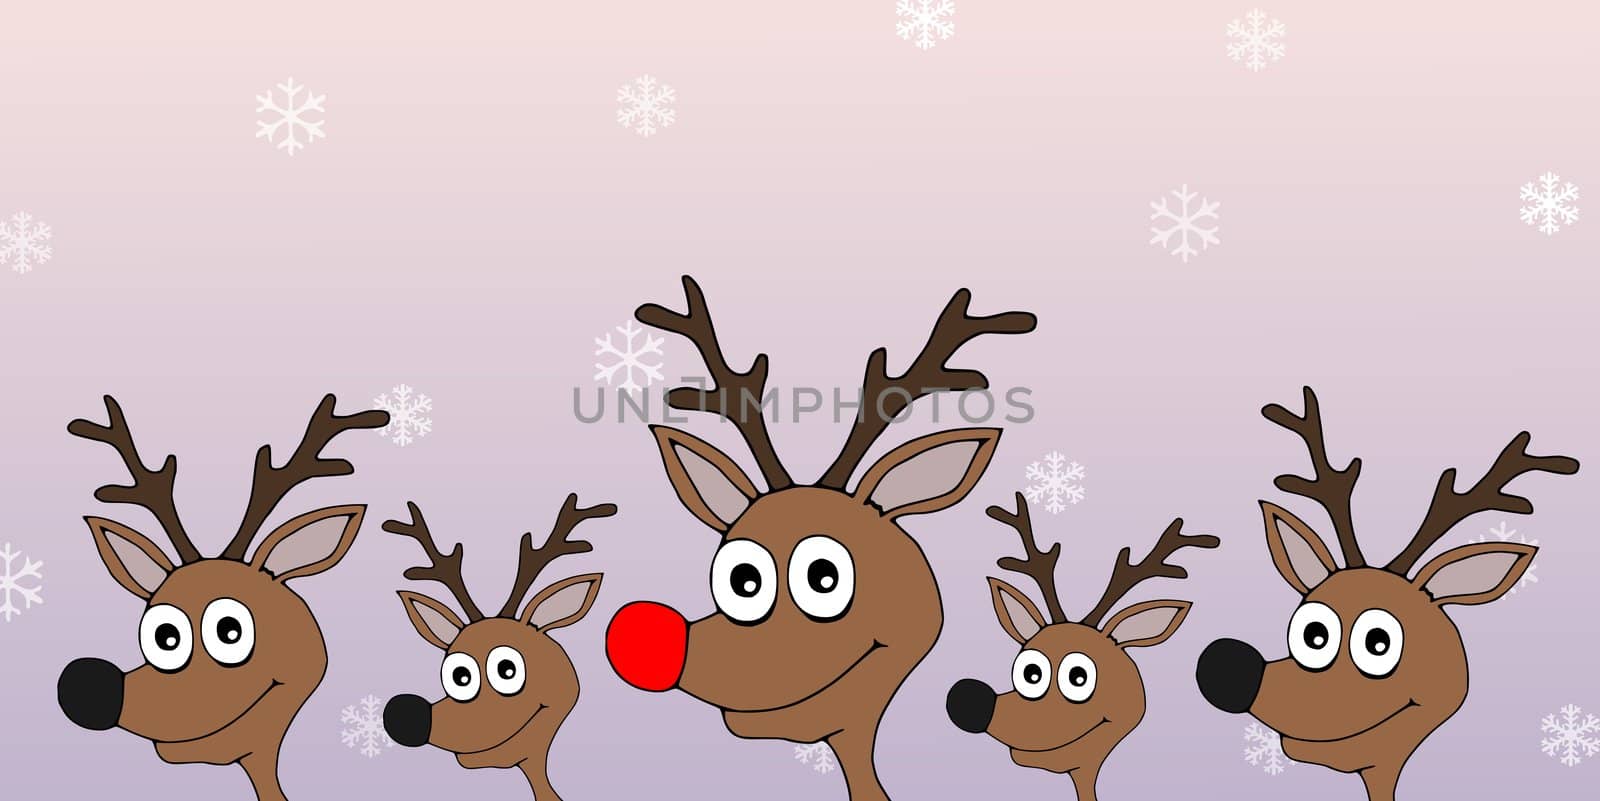 Illustration of Reindeer over a snowing background with Rudolph at the front